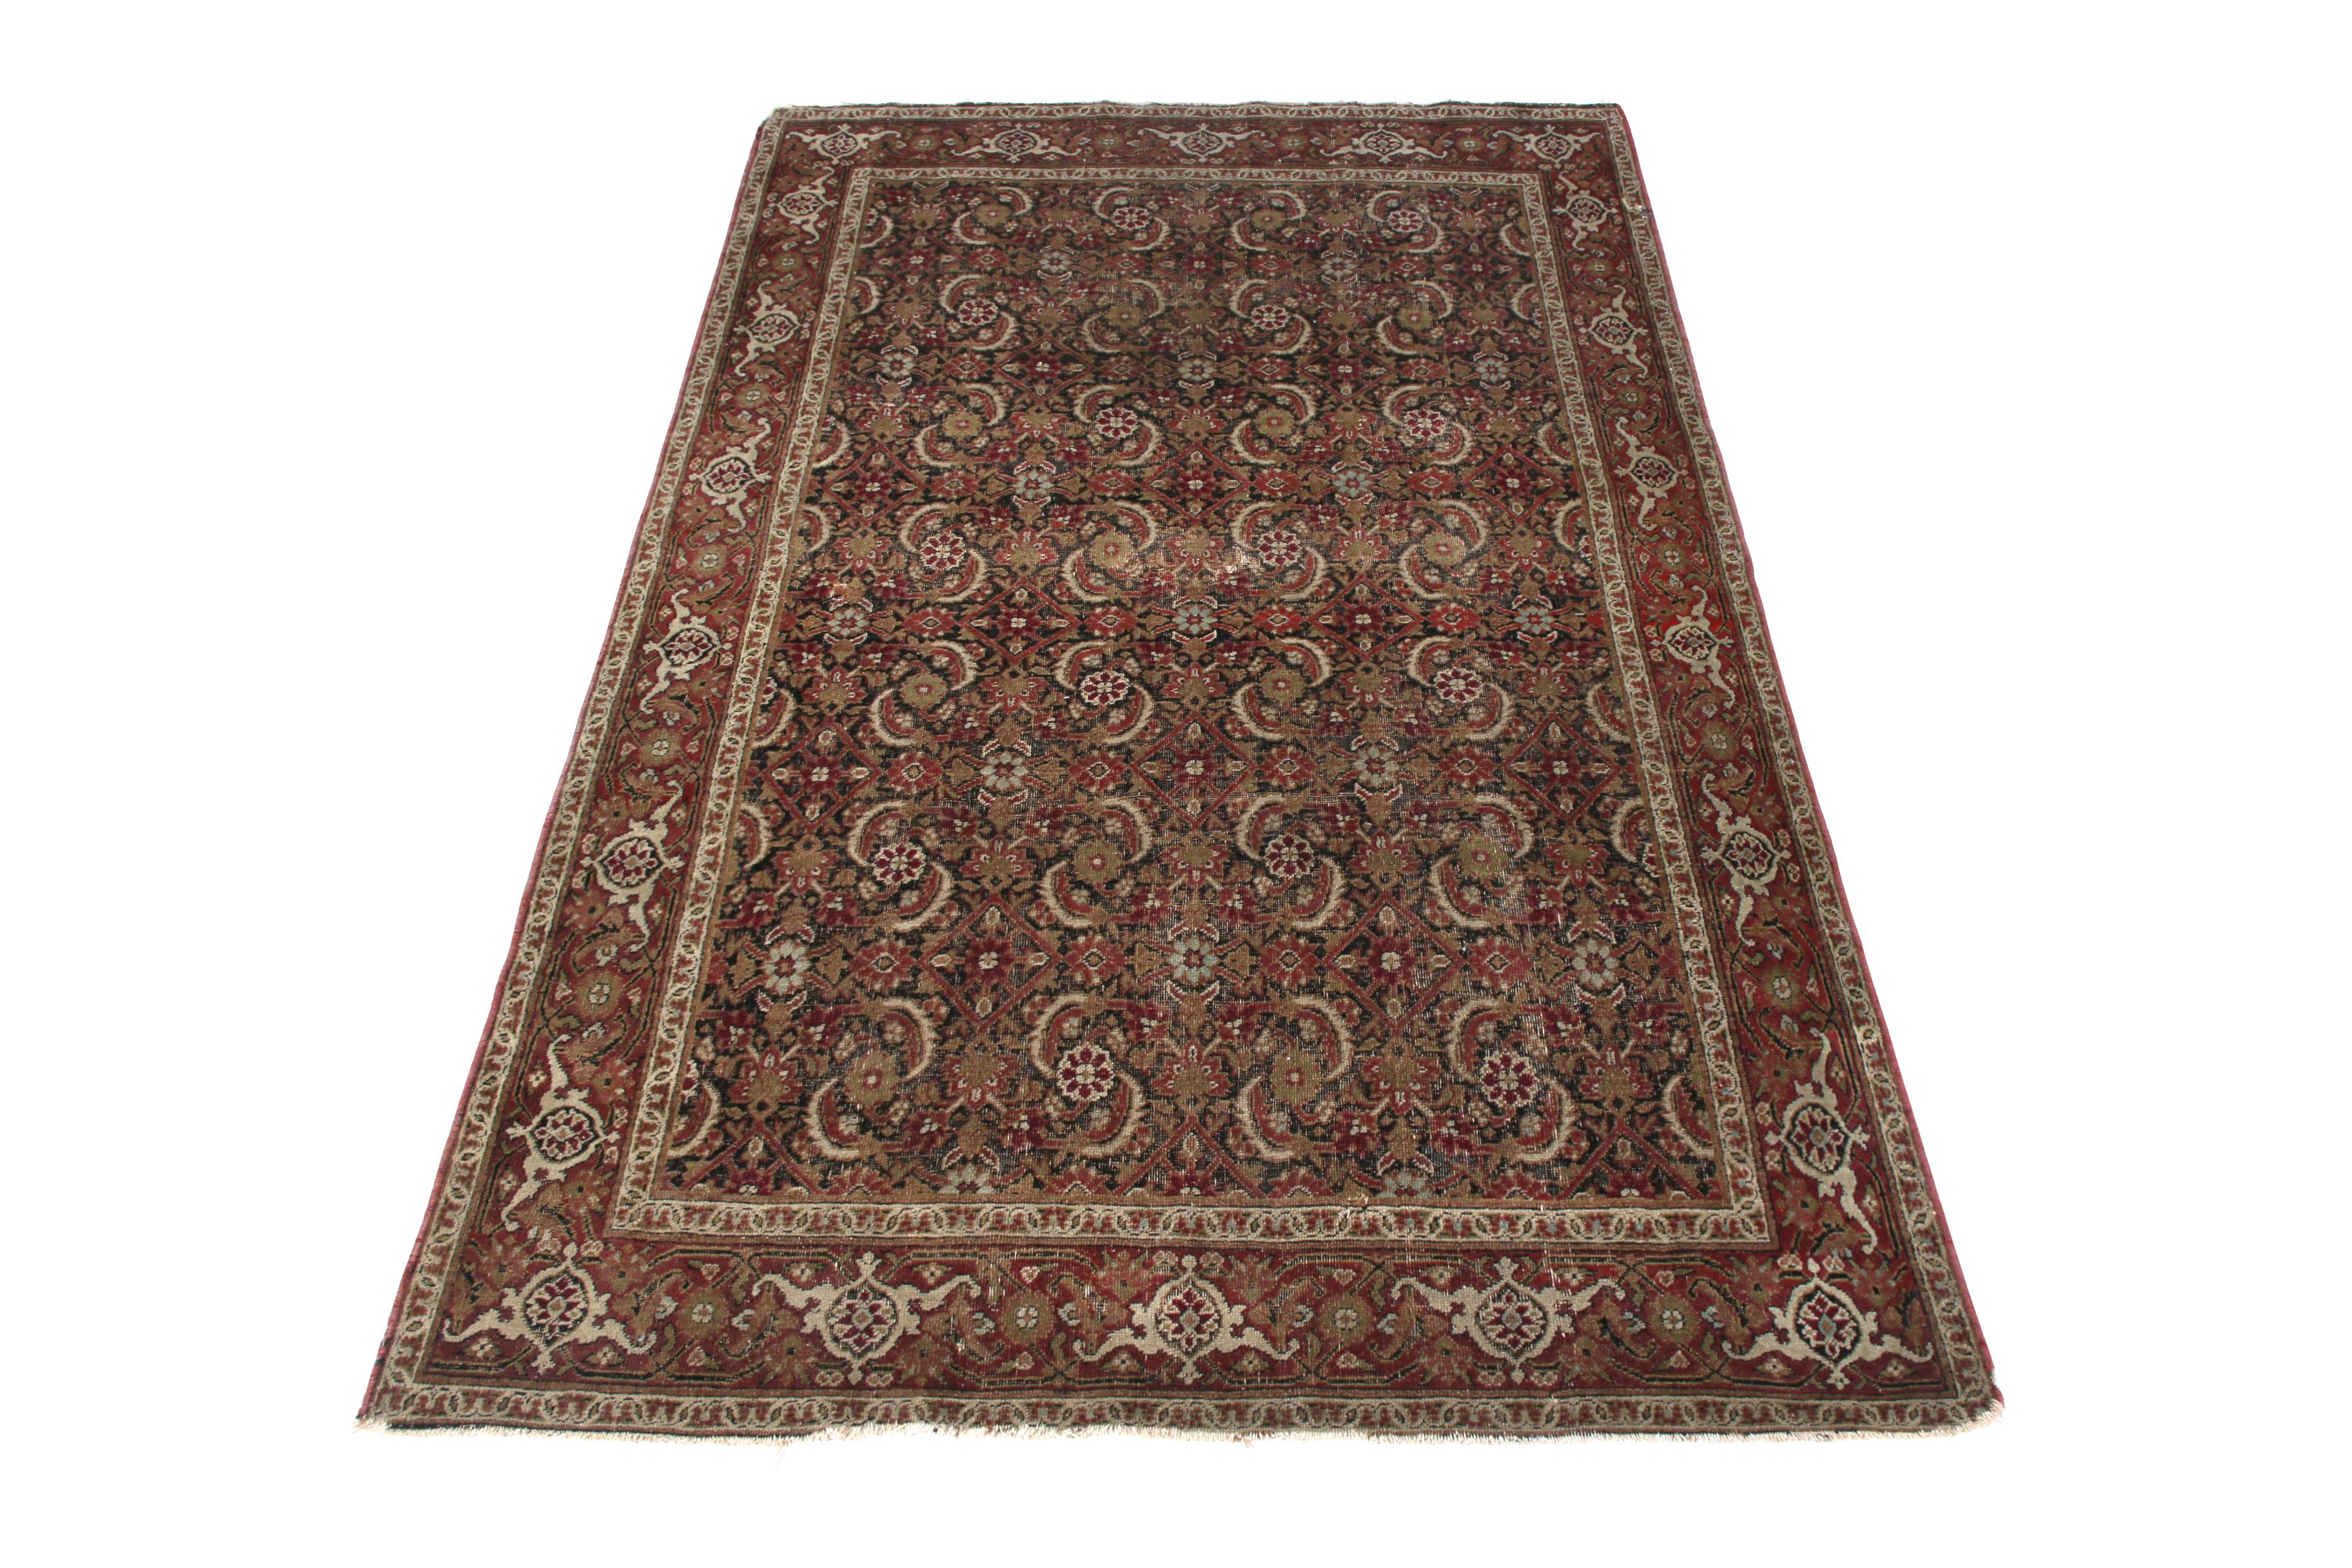 Hand knotted in wool originating from the titular Persian region circa 1890-1900, this antique Kerman Lavar rug enjoys a distinguished marriage between sought-after, exceptionally rich colorway and a celebrated classic pattern. The play of this